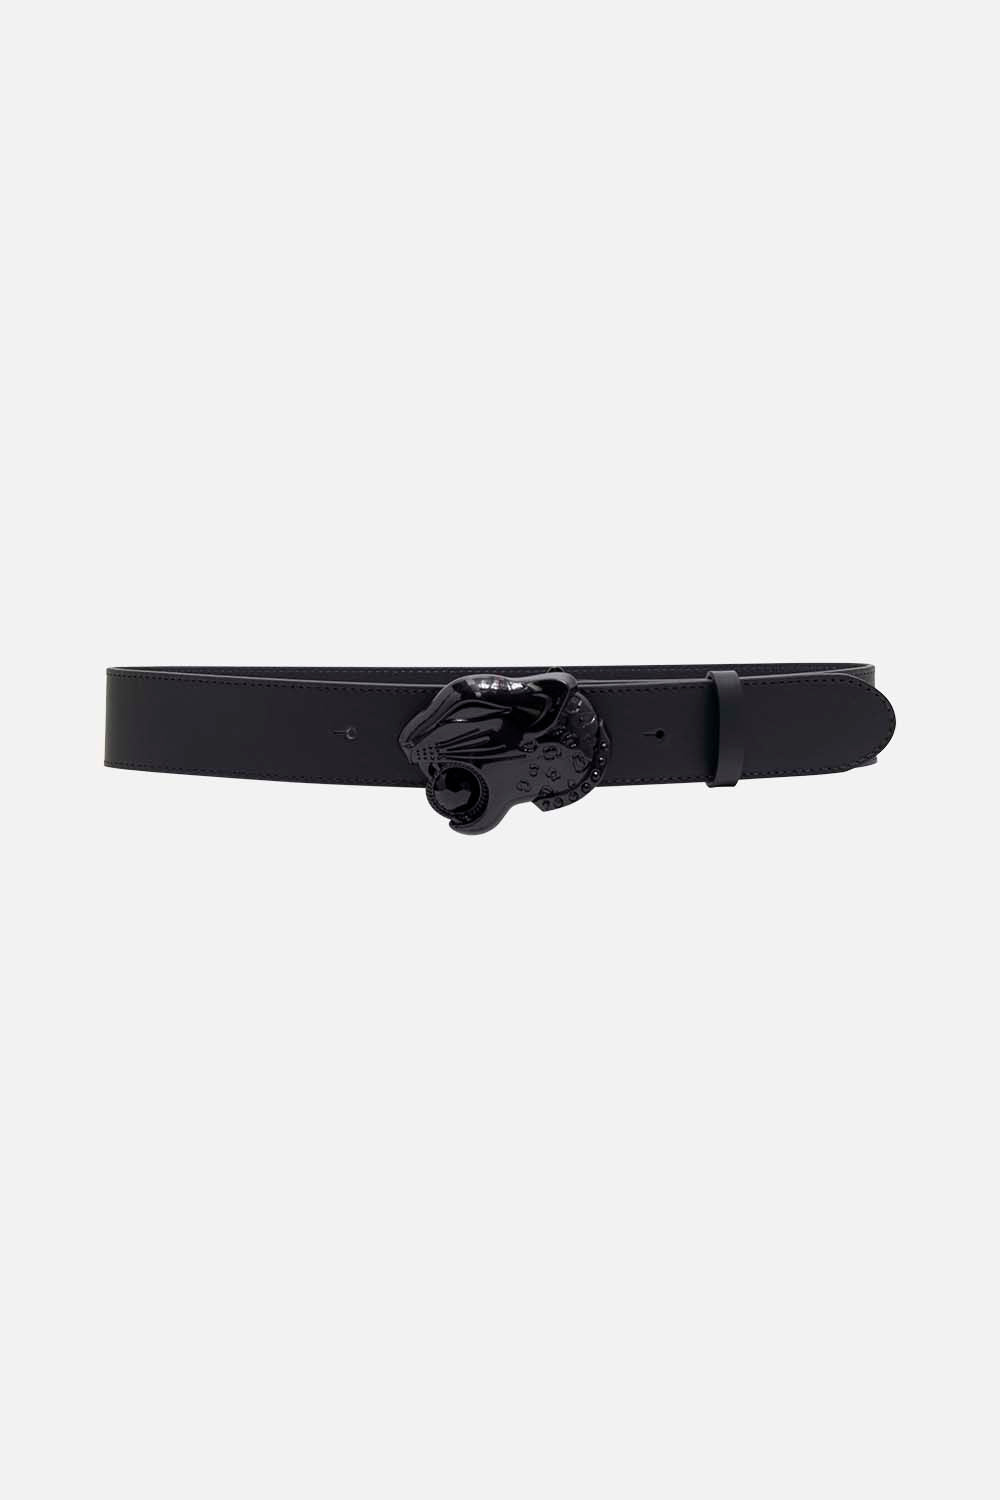 Product view of CAMILLA leopard head leather belt in Solid black